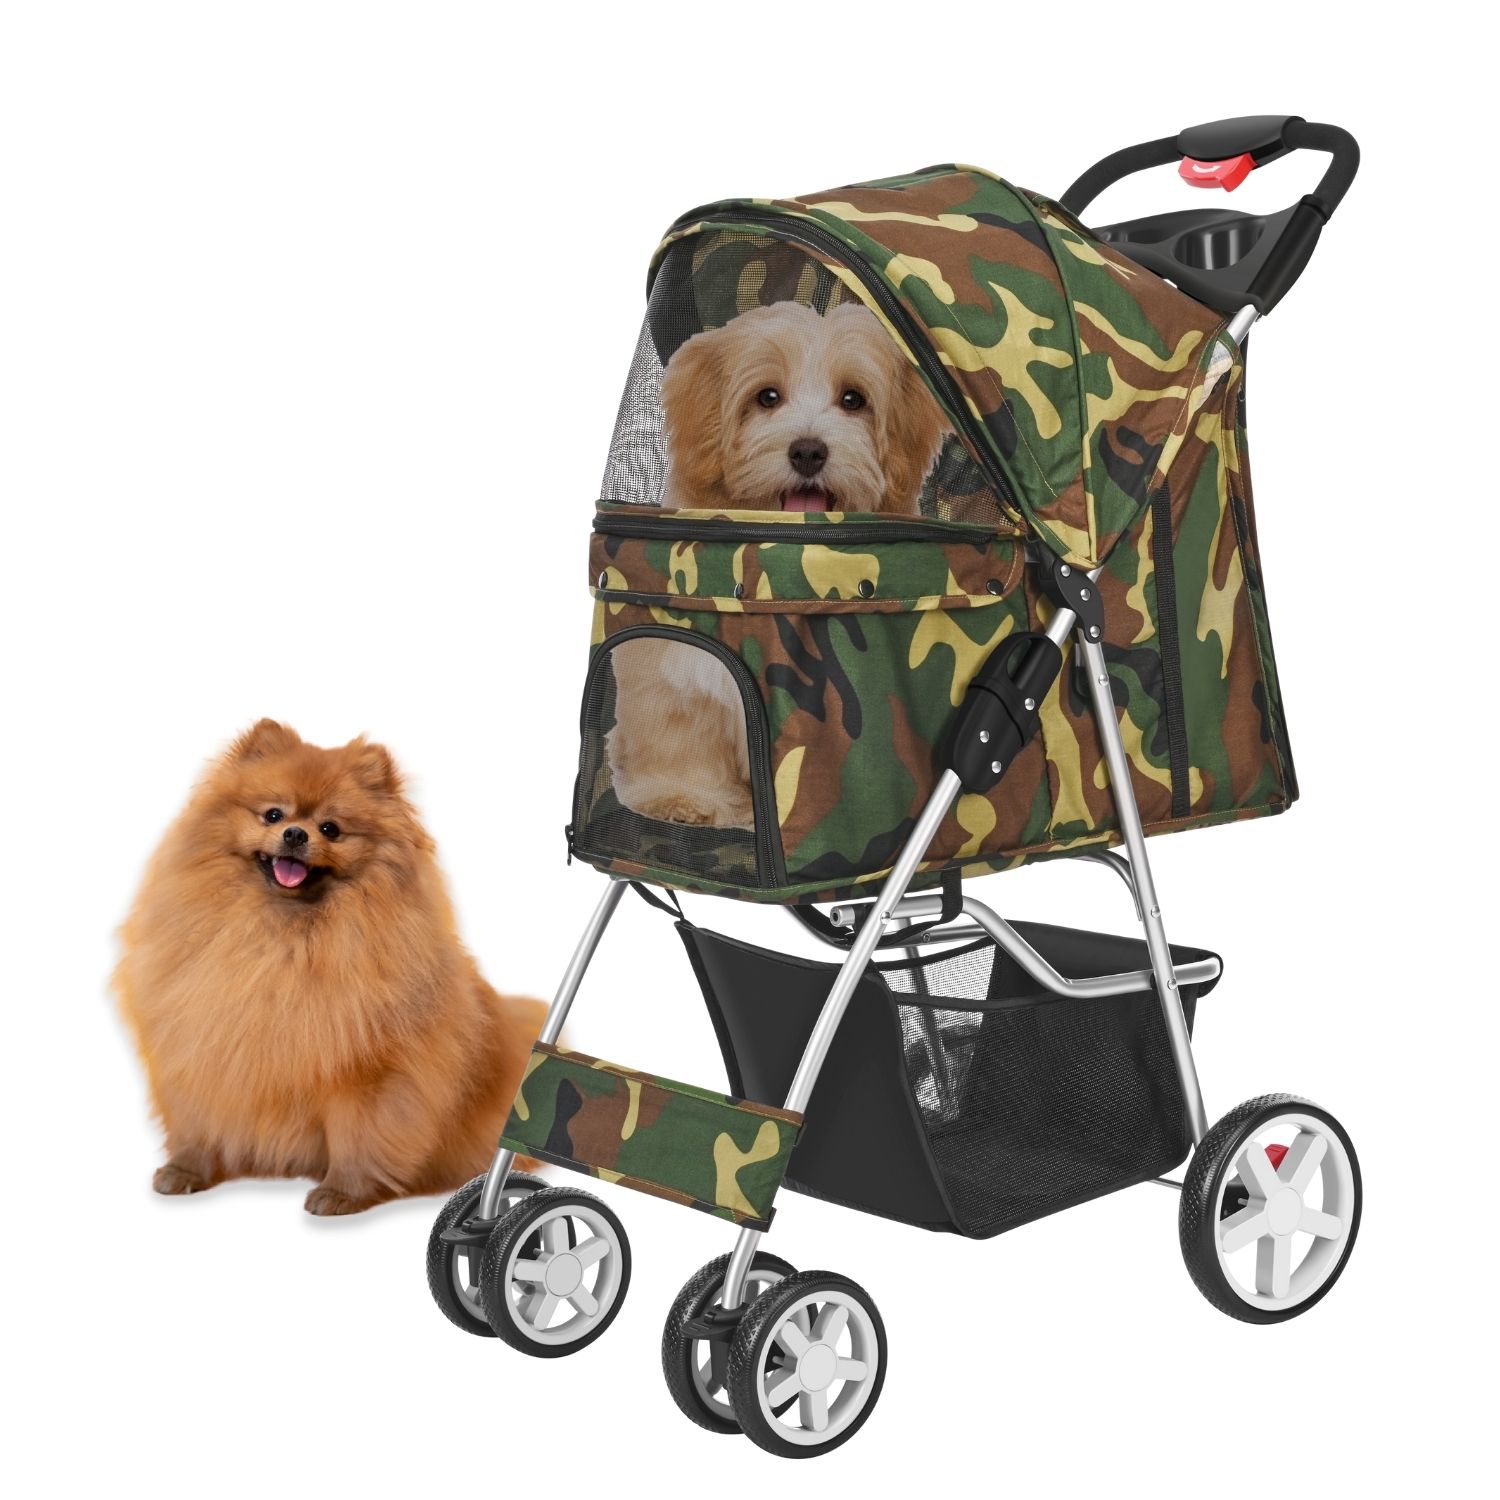 CE Compass 4 Wheels Pet Dog Stroller Cat Small Animals Carrier Large Deluxe Folding Flexible for Travel Up to 30 Pounds Sun Shade Camo